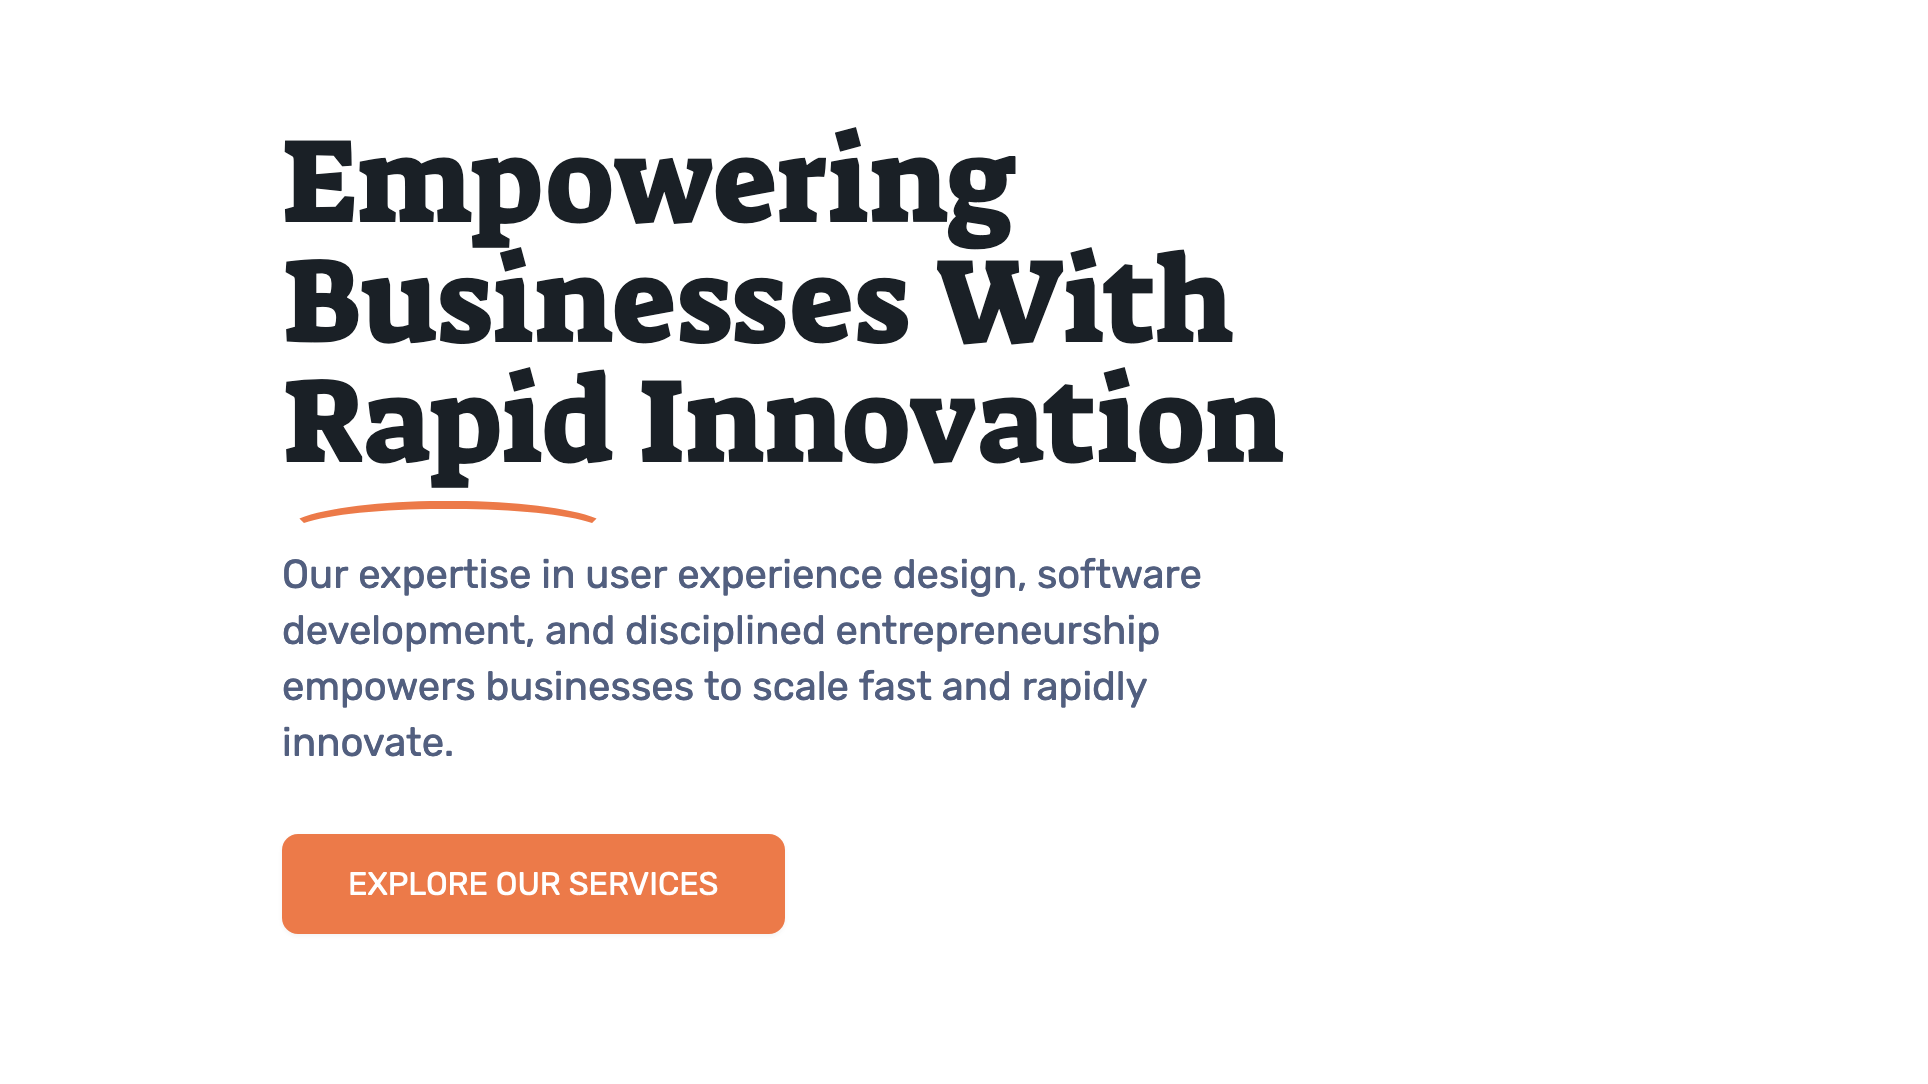 RapidIteration - Empowering businesses with rapid innovation